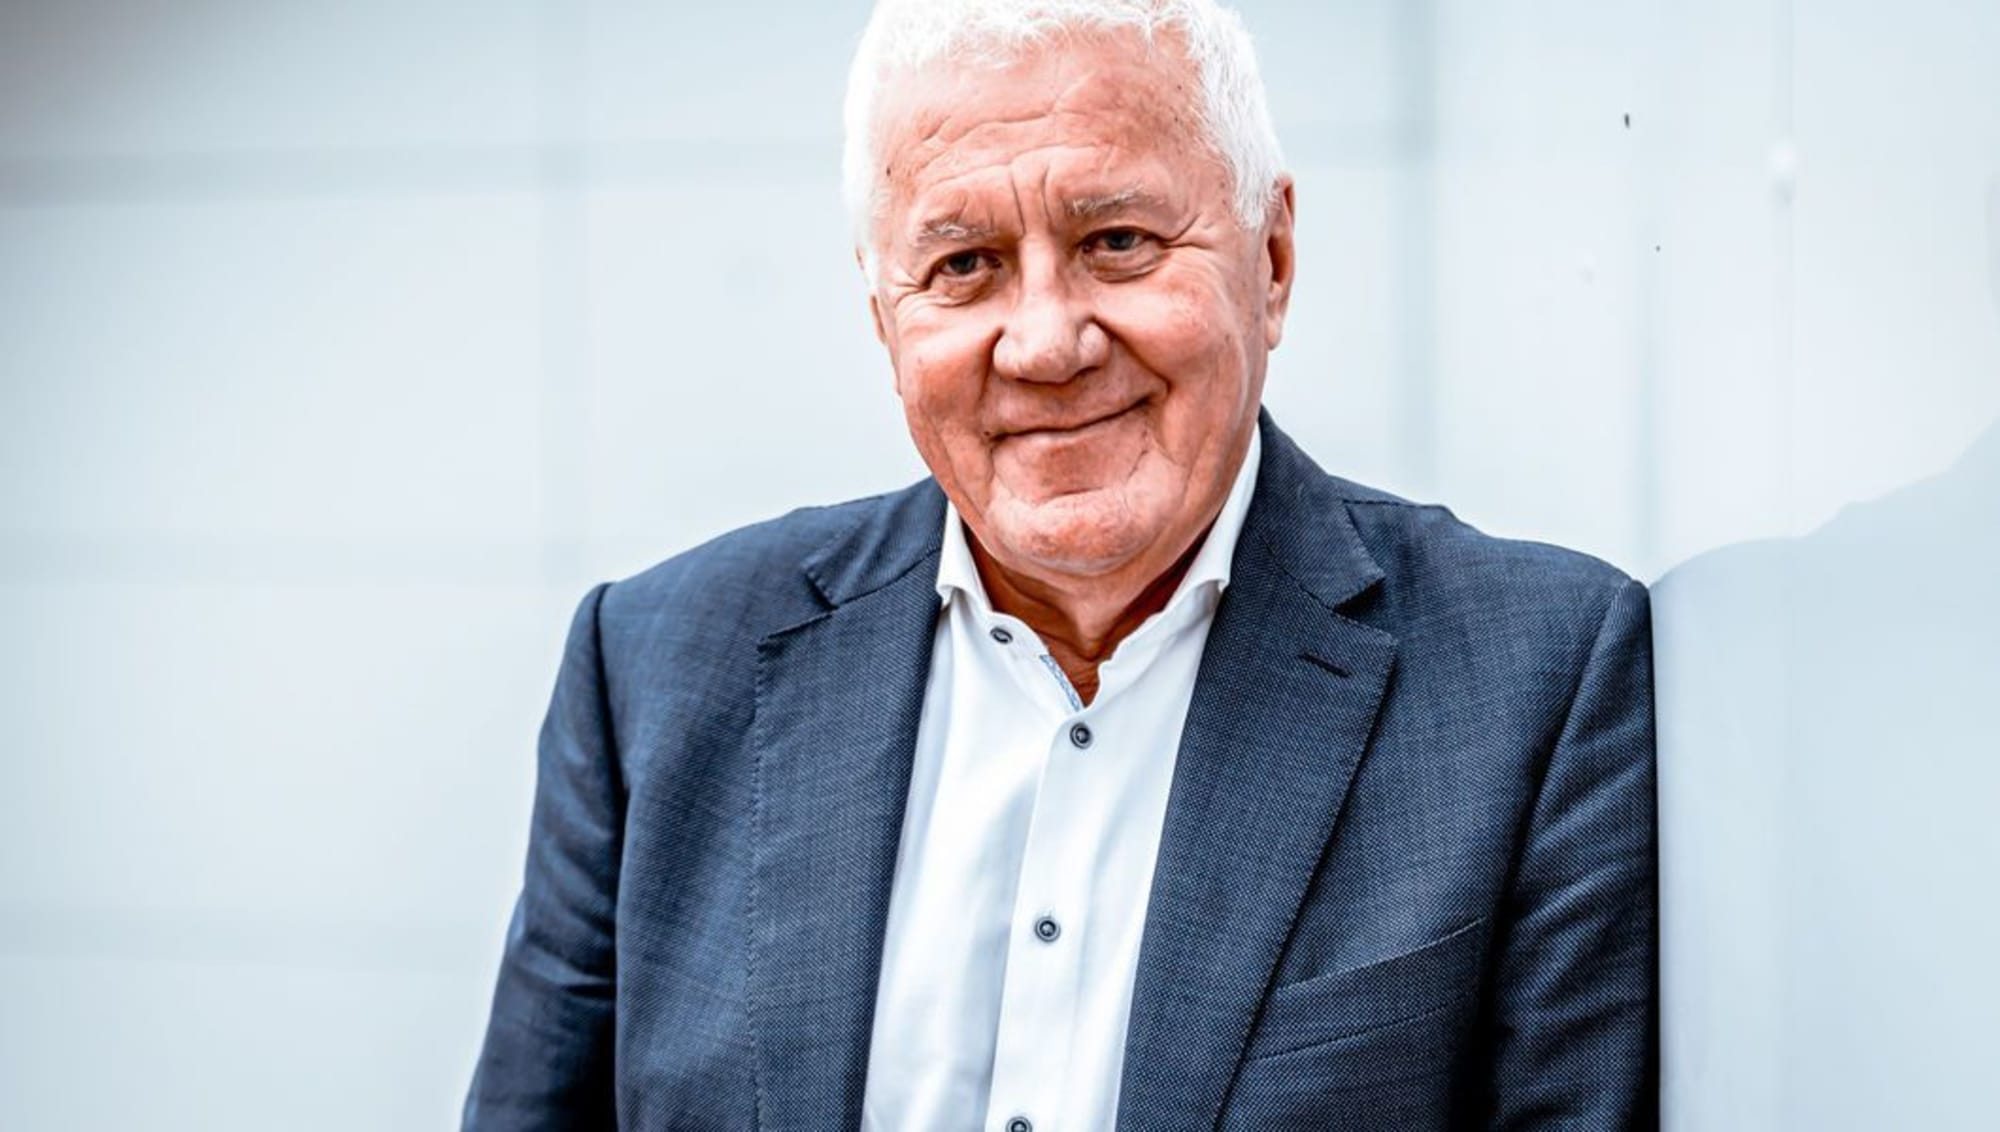 Who is Patrick Lefevere? Why the controversy?